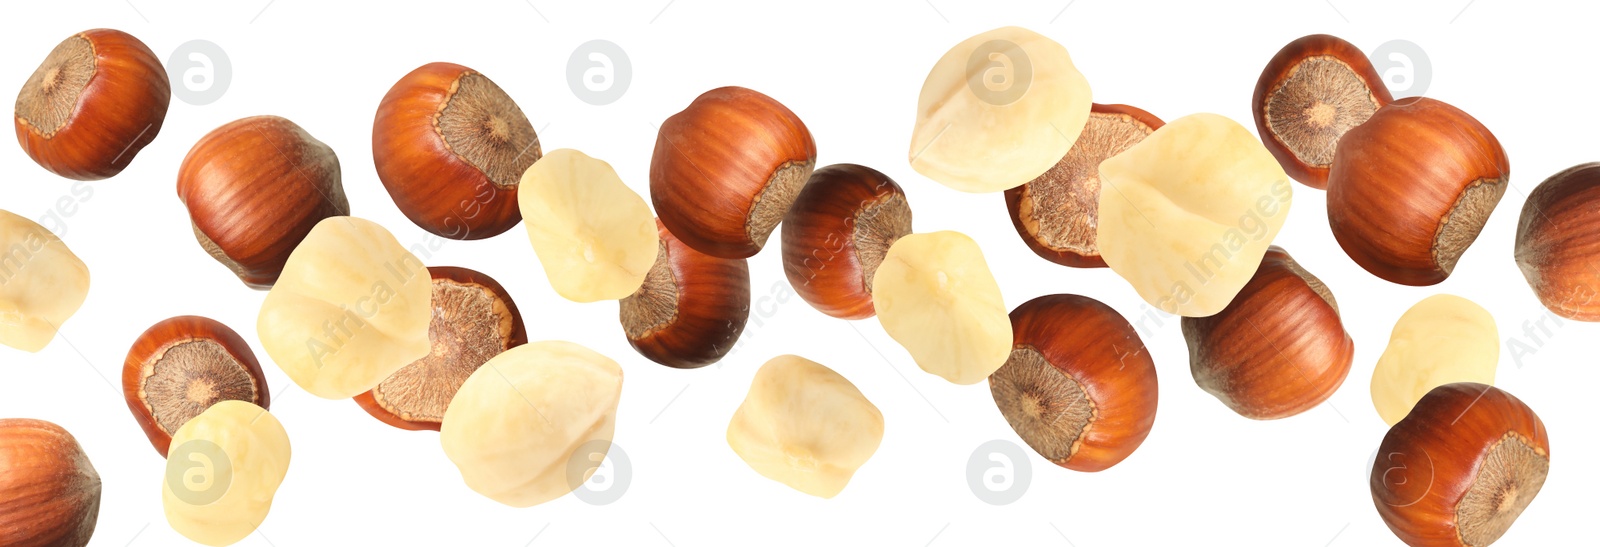 Image of Tasty hazelnuts falling on white background, banner design. Healthy snack